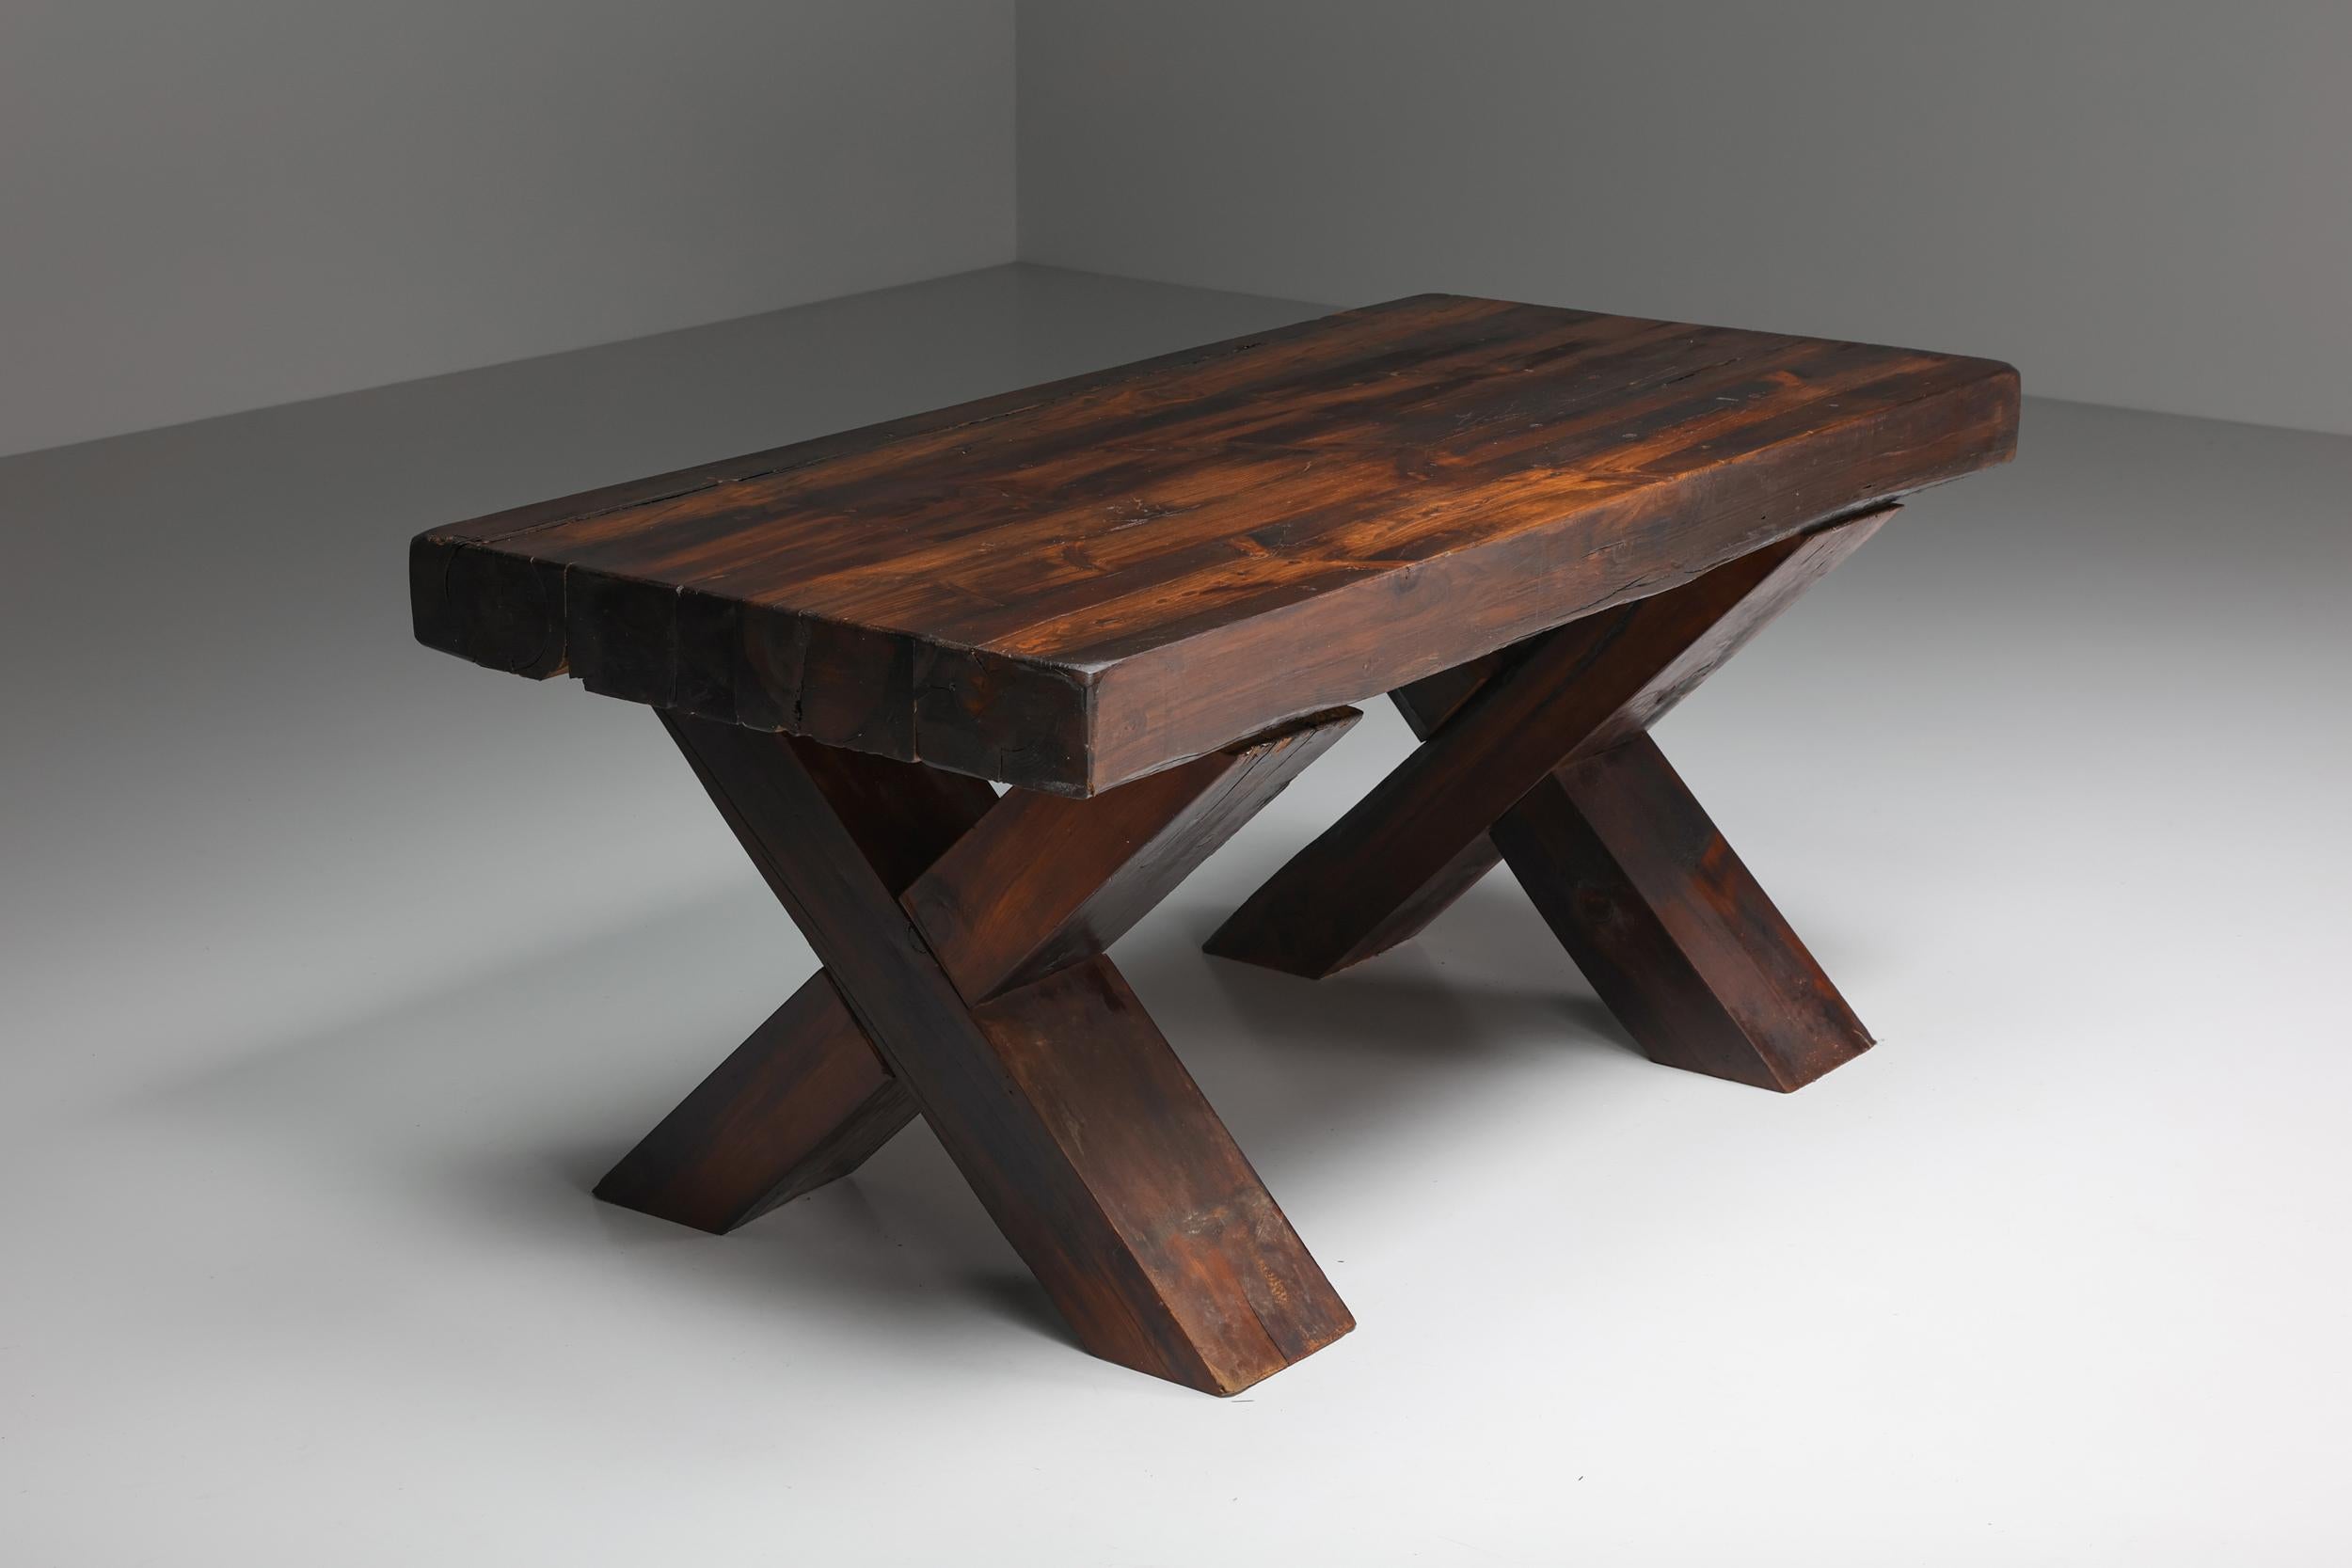 Italian Rustic Brutalist Dark Wooden Dining Table with X-Legs, Italy, 1940's